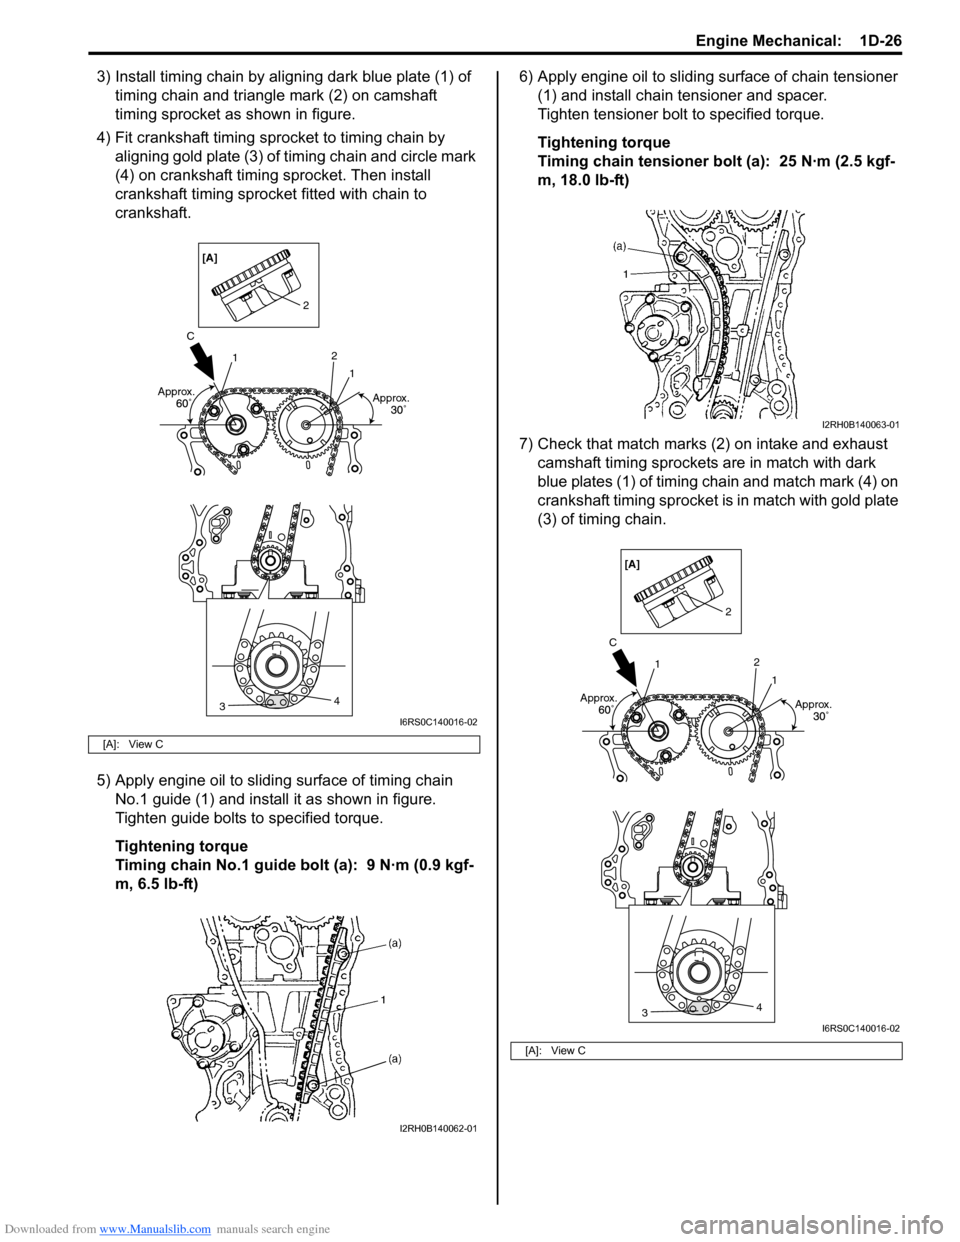 SUZUKI SWIFT 2008 2.G Service Owners Manual Downloaded from www.Manualslib.com manuals search engine Engine Mechanical:  1D-26
3) Install timing chain by aligning dark blue plate (1) of timing chain and triangle mark (2) on camshaft 
timing spr